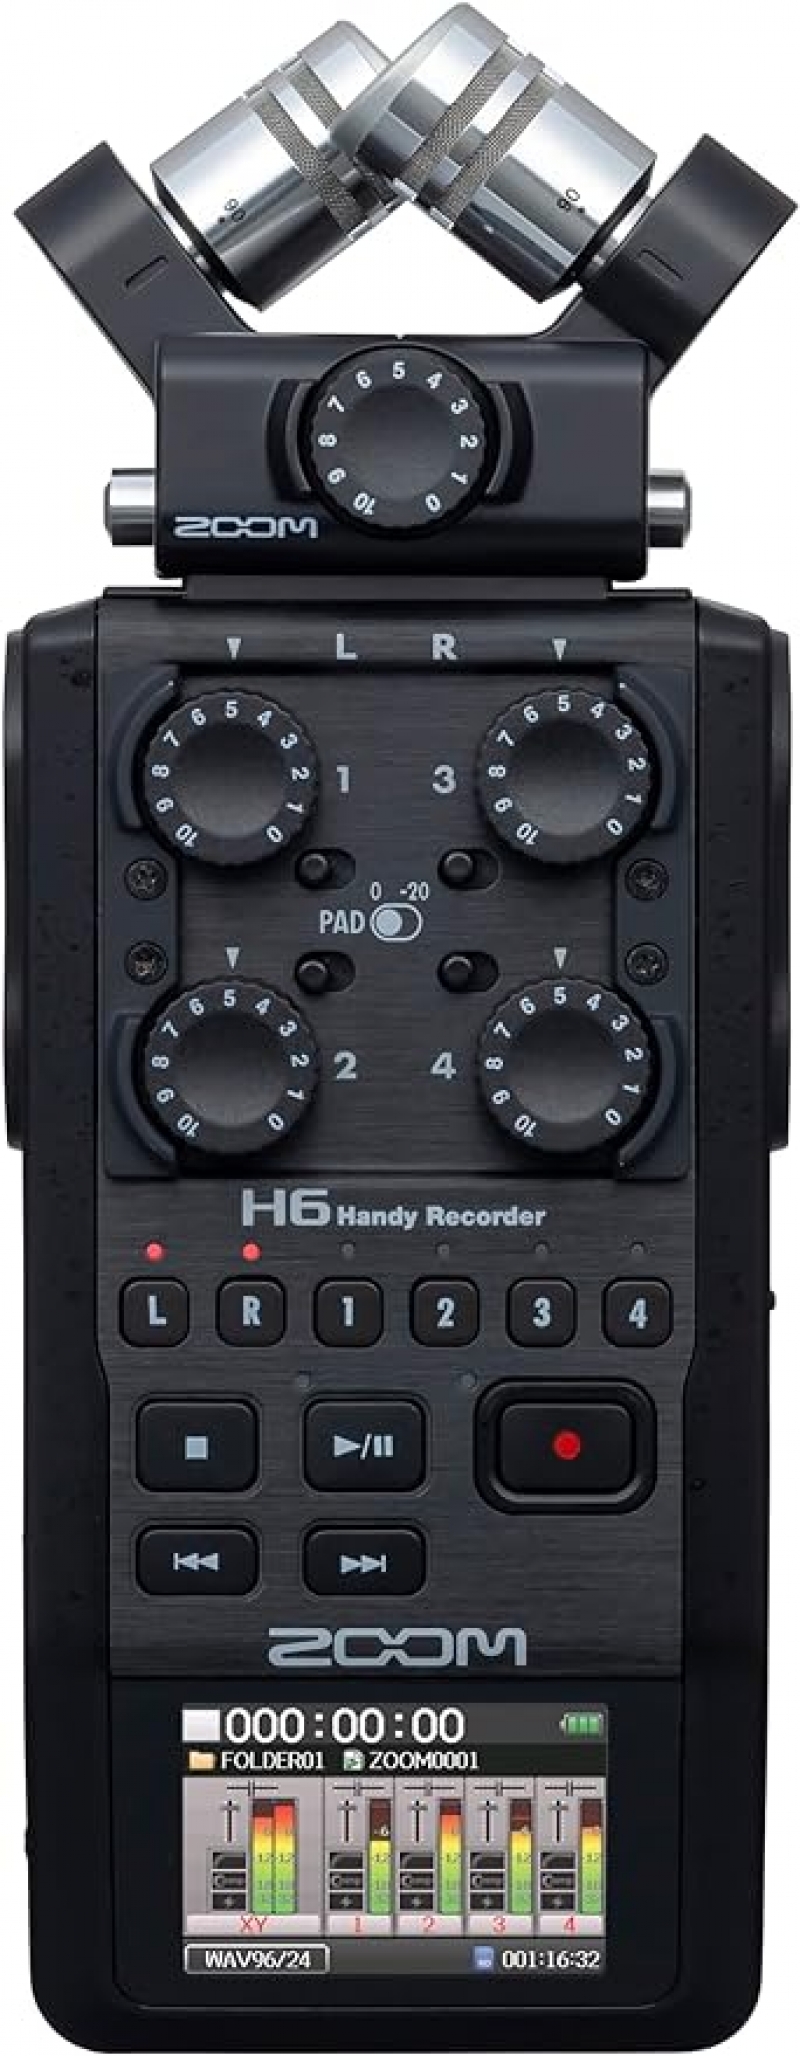 ihocon: Zoom H6 All Black 6-Track Portable Recorder • Stereo Microphones • 4 XLR/TRS Inputs • Records to SD Card • USB Audio Interface • Battery Powered • Podcasting and Music 隨身錄音機